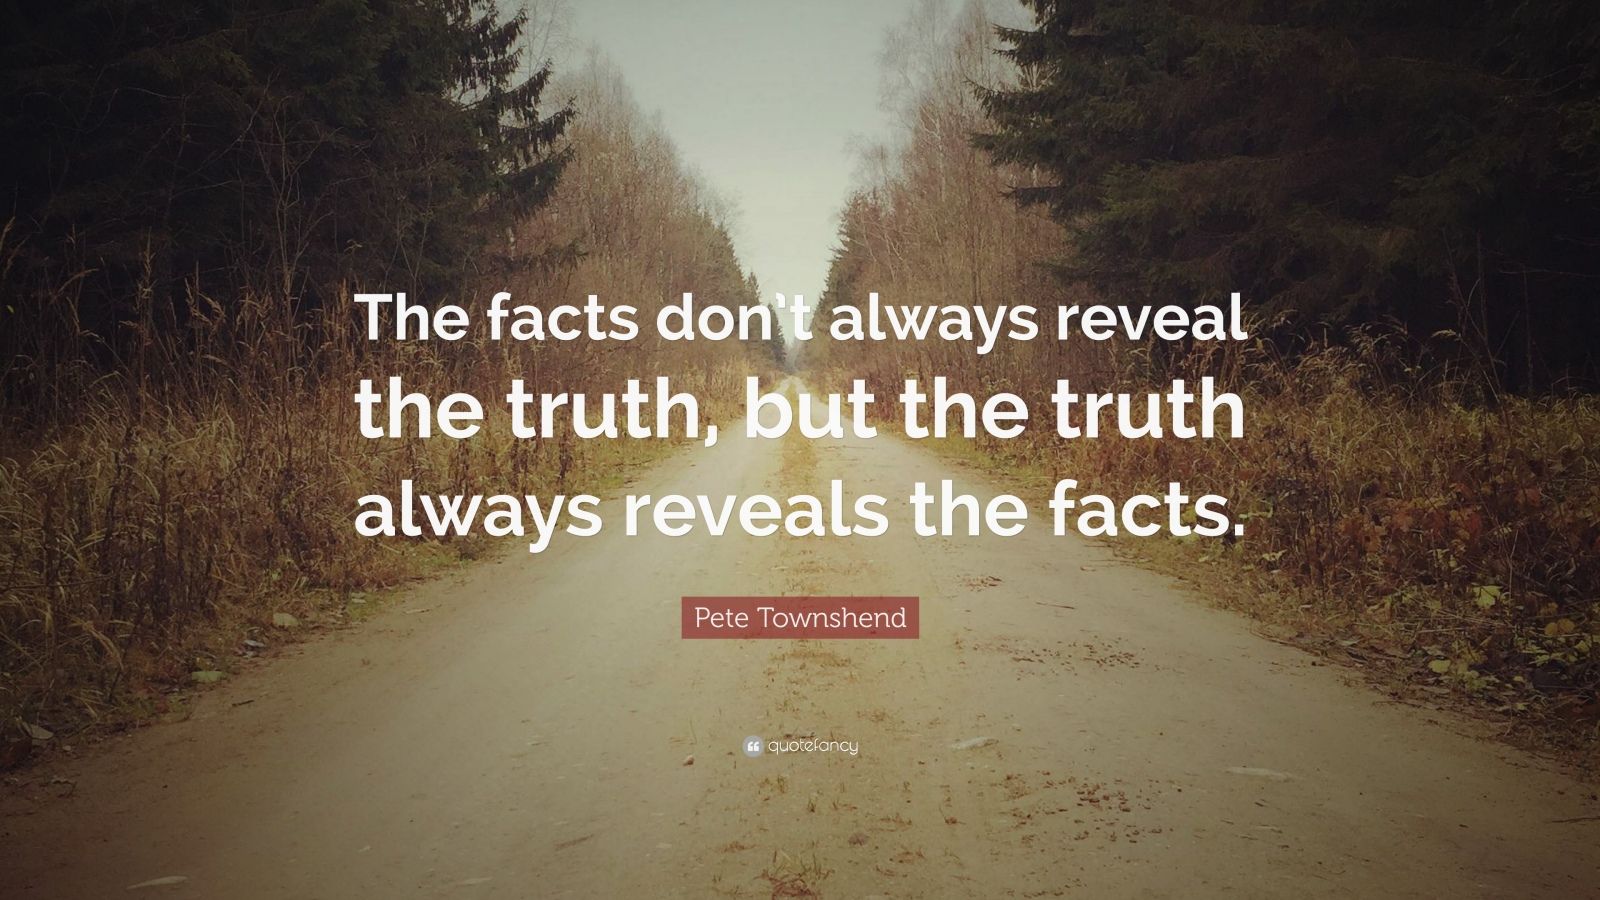 Pete Townshend Quote: "The facts don't always reveal the ...